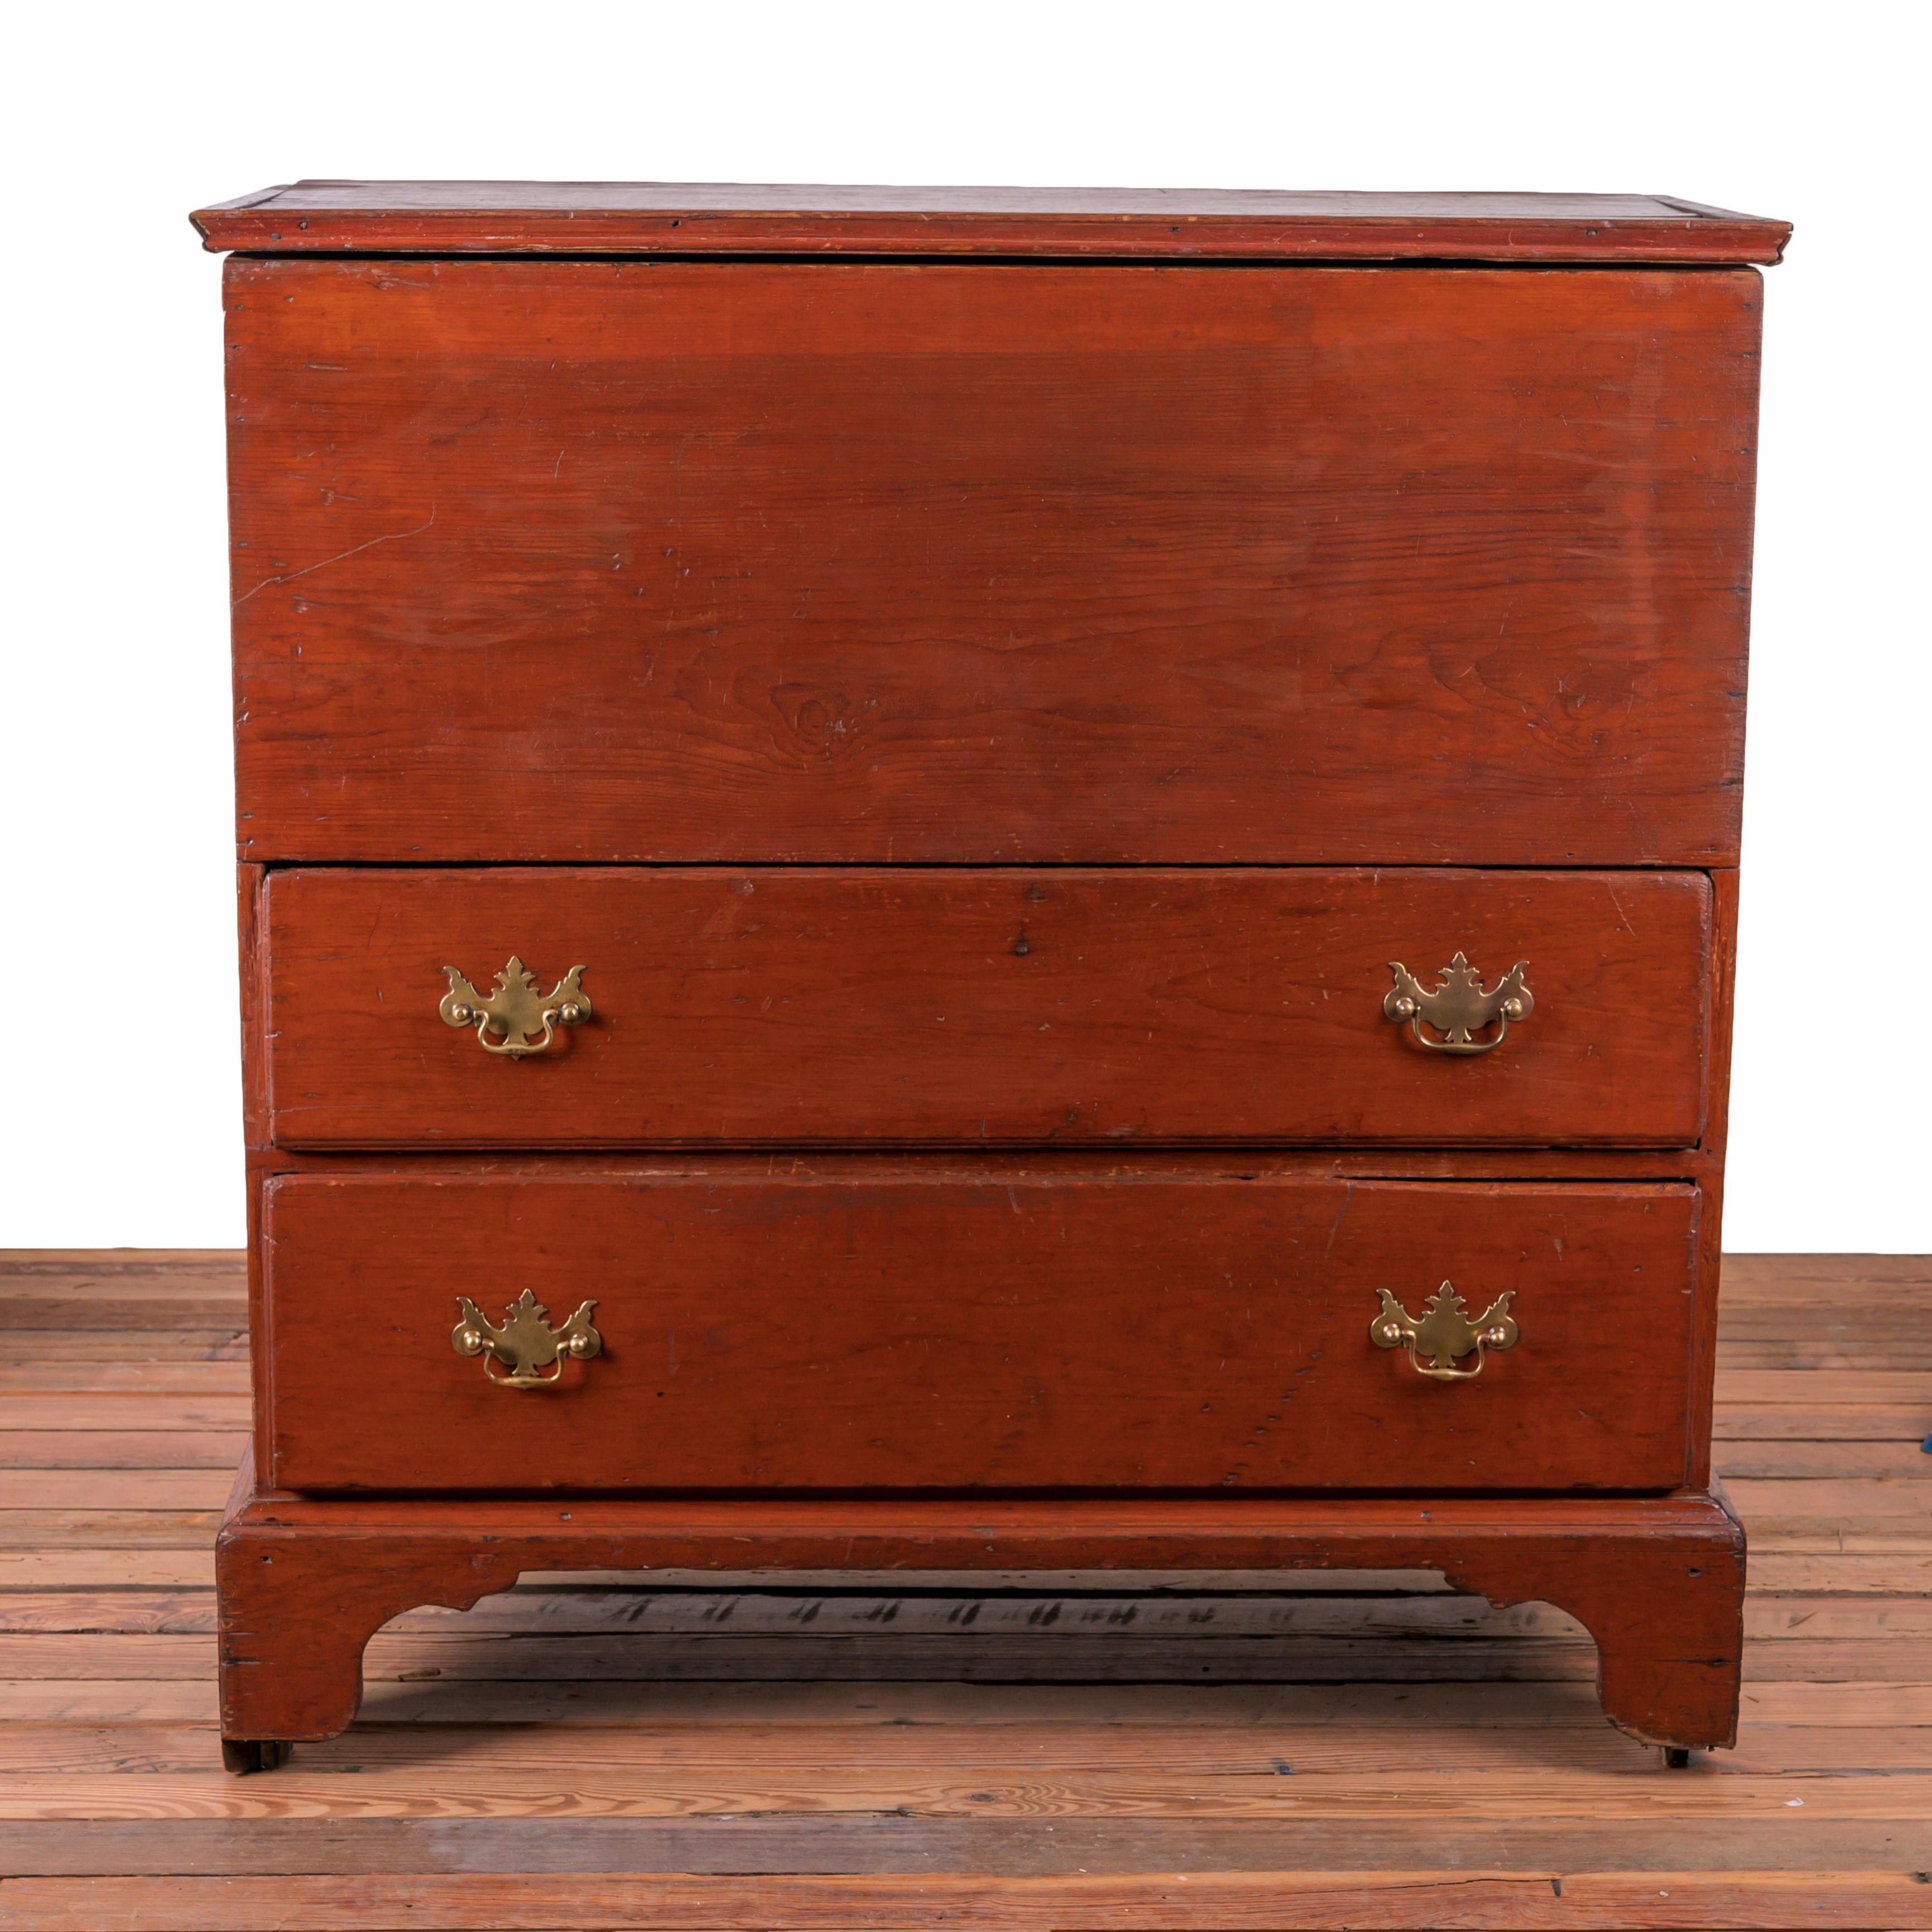 A New England mule chest, 19th century.

Pine with red wash, moulded lid and drawers, solid bootjack ends with attached shaped and moulded apron.

40 ¼ inches wide by 19 ¼ inches deep by 41 inches tall 

